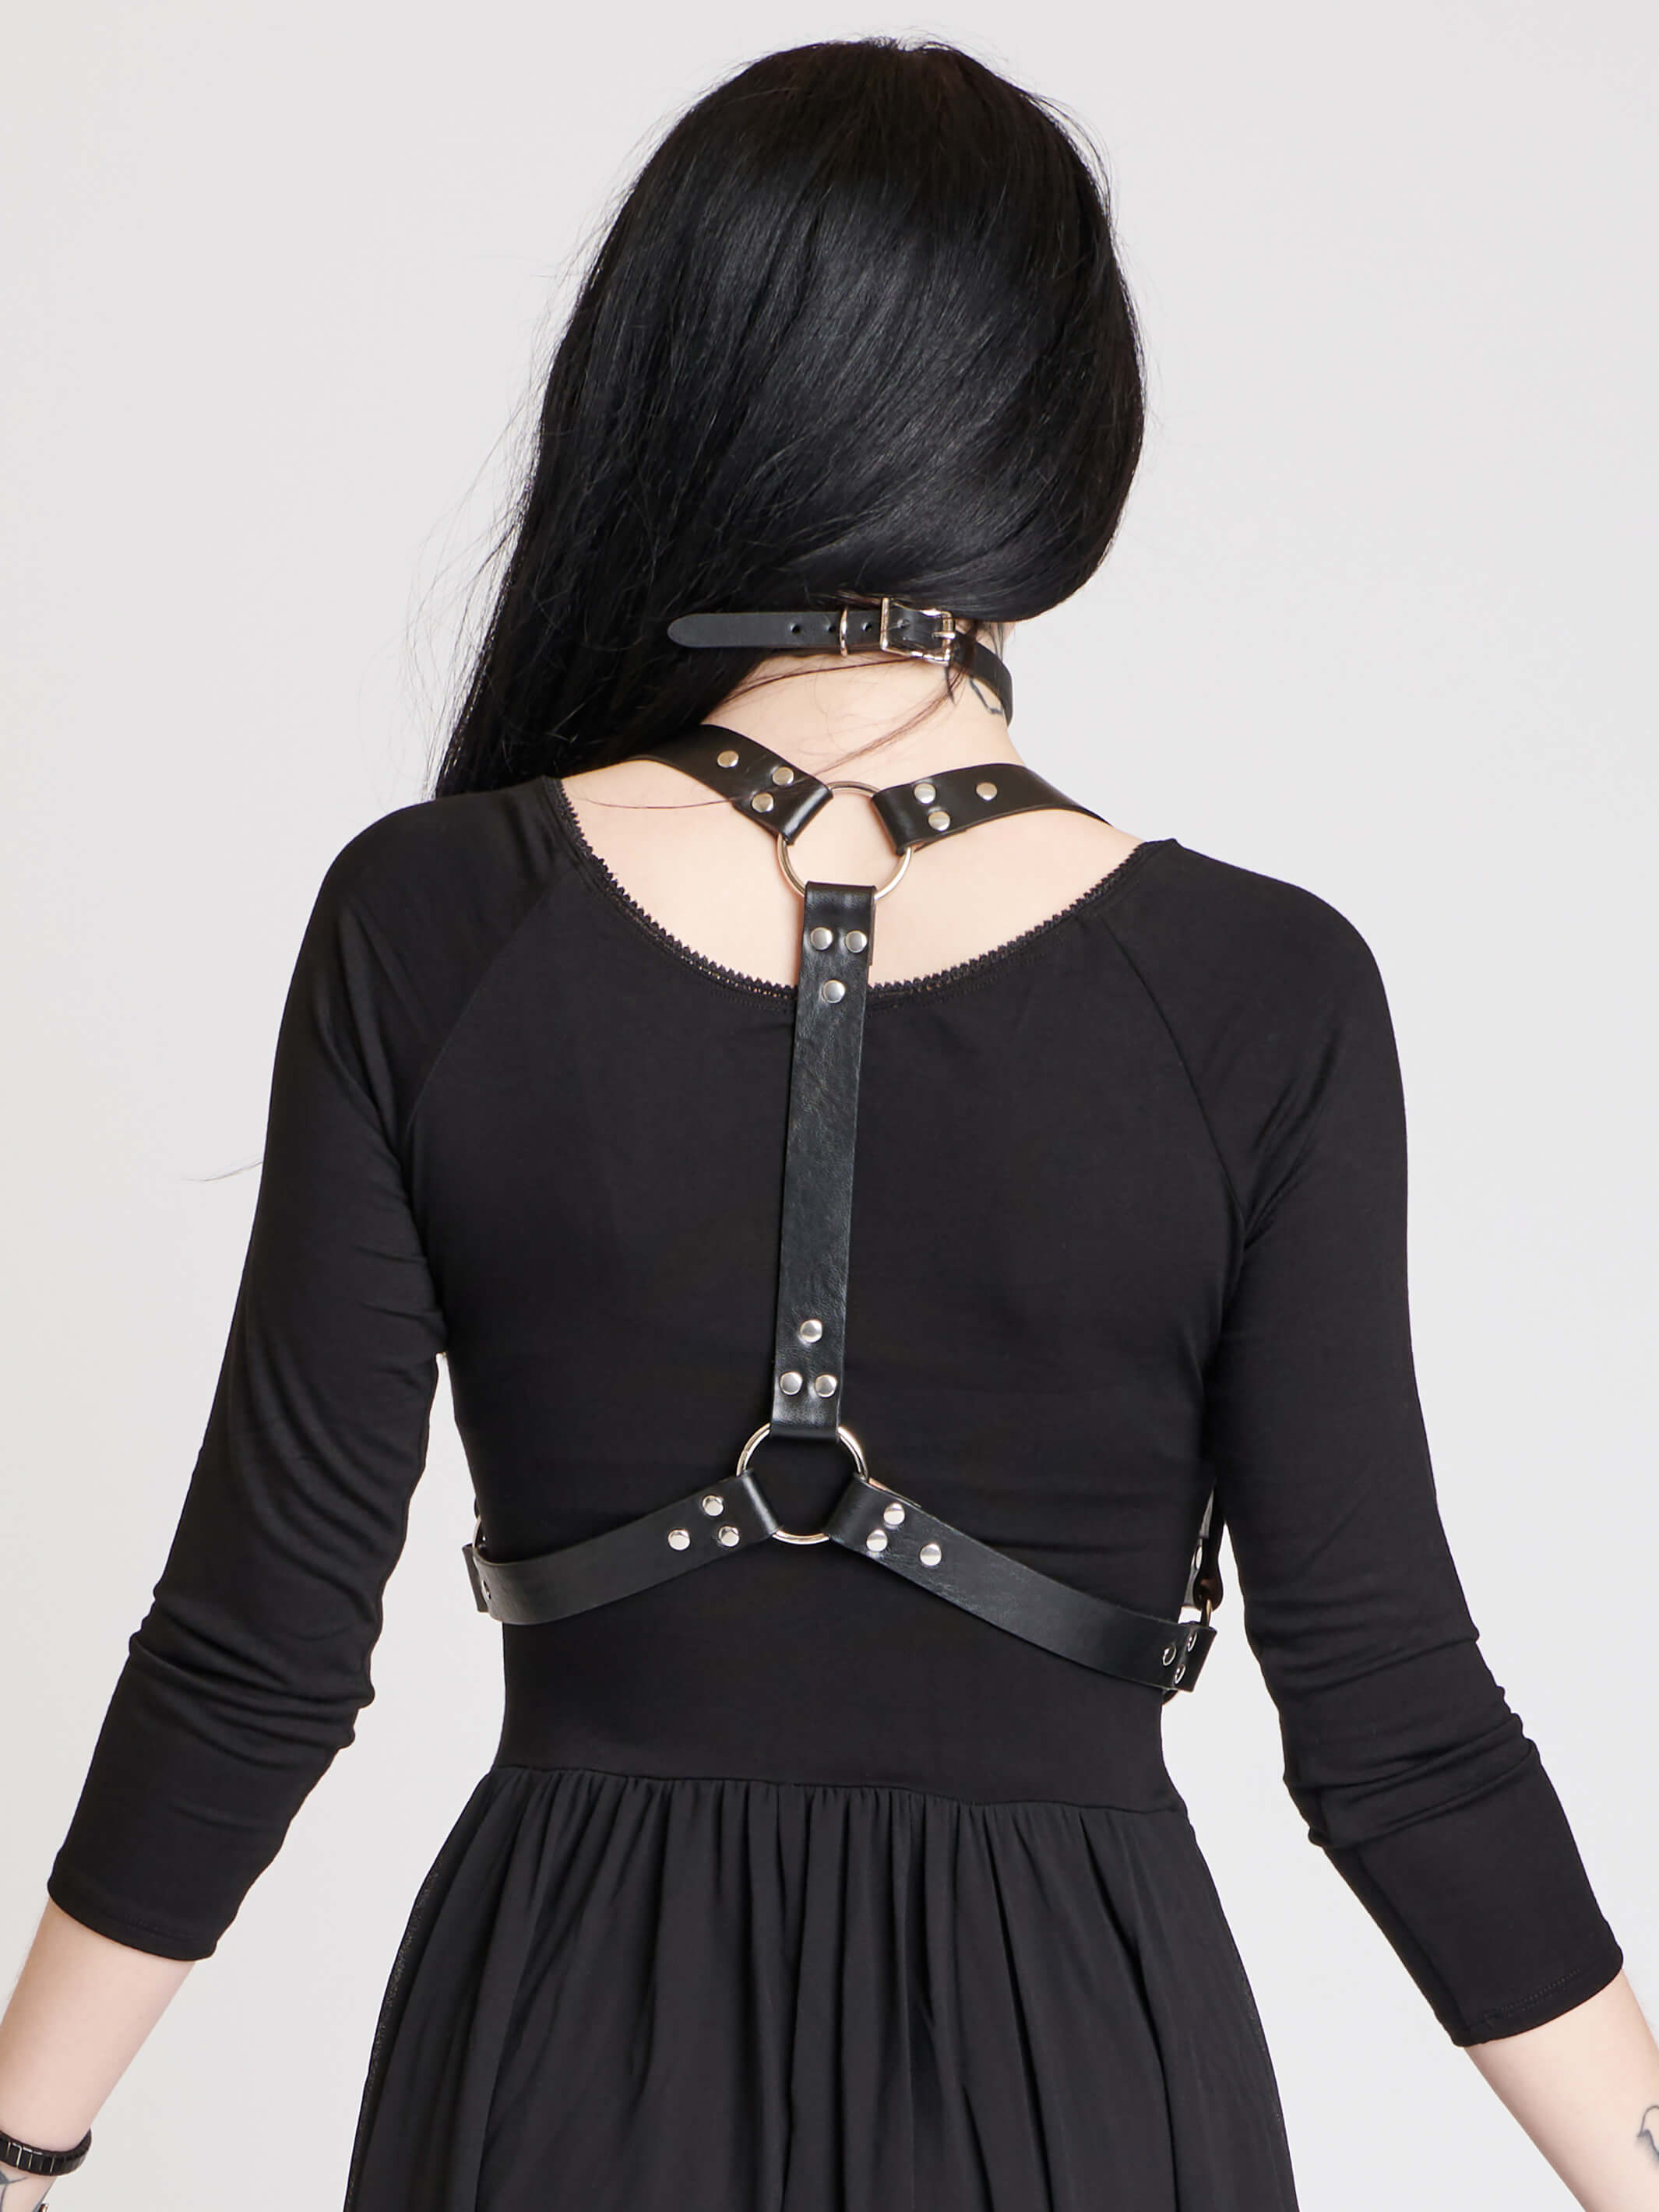 Goth Plus Size Belts and Harnesses – Midnight Hour